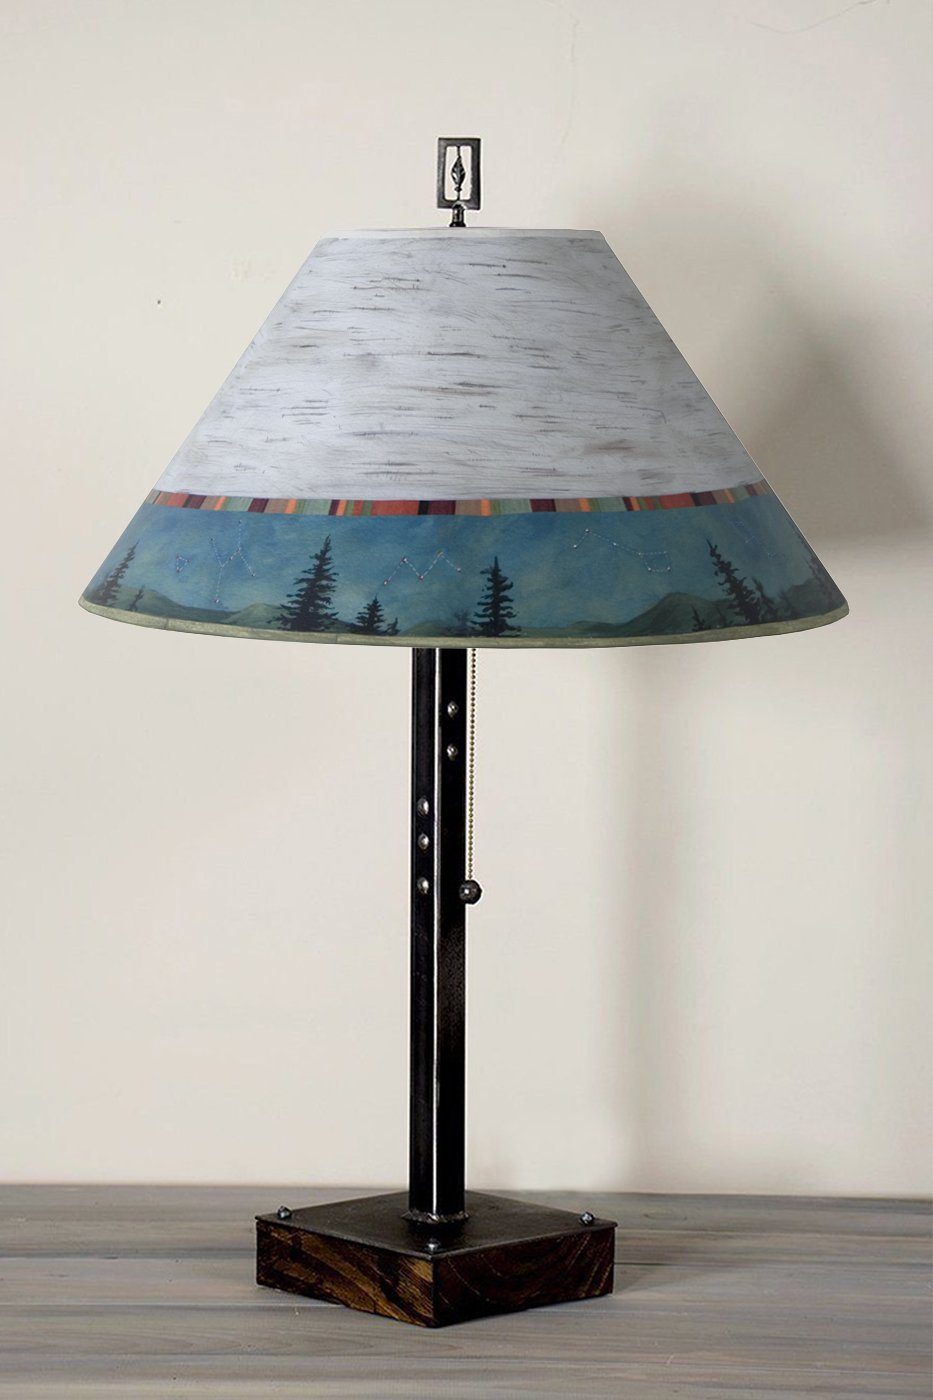 Janna Ugone & Co Table Lamps Steel Table Lamp on Wood with Large Conical Shade in Birch Midnight